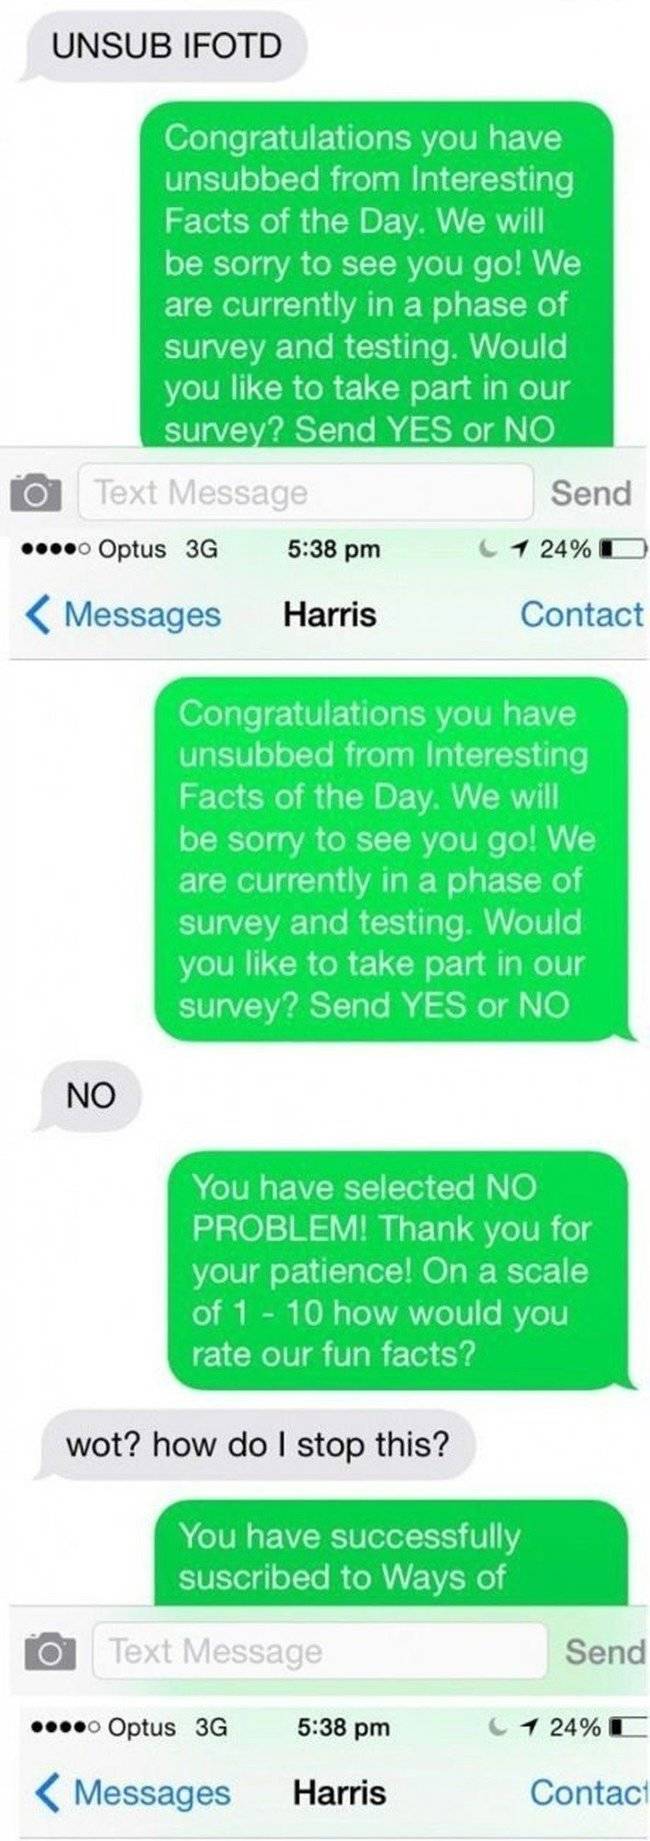 troll a text scammer - Unsub Ifotd Congratulations you have unsubbed from interesting Facts of the Day. We will be sorry to see you go! We are currently in a phase of survey and testing. Would you to take part in our survey? Send Yes or No O Text Message 